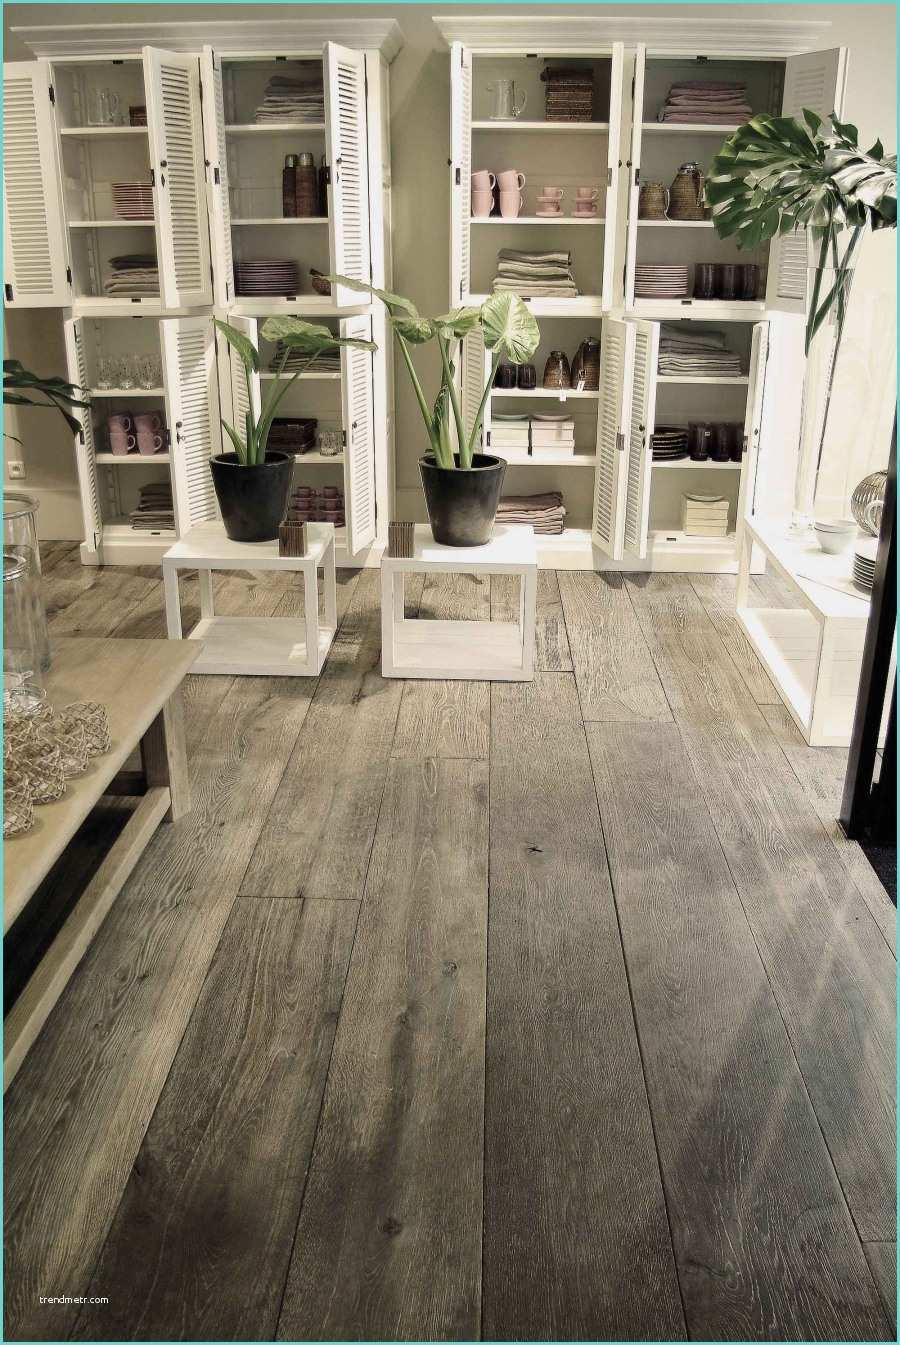 Parquet Vieilli Blanchi Parquet Vieilli Blanchi Parquet Contrecoll Chne Old Story